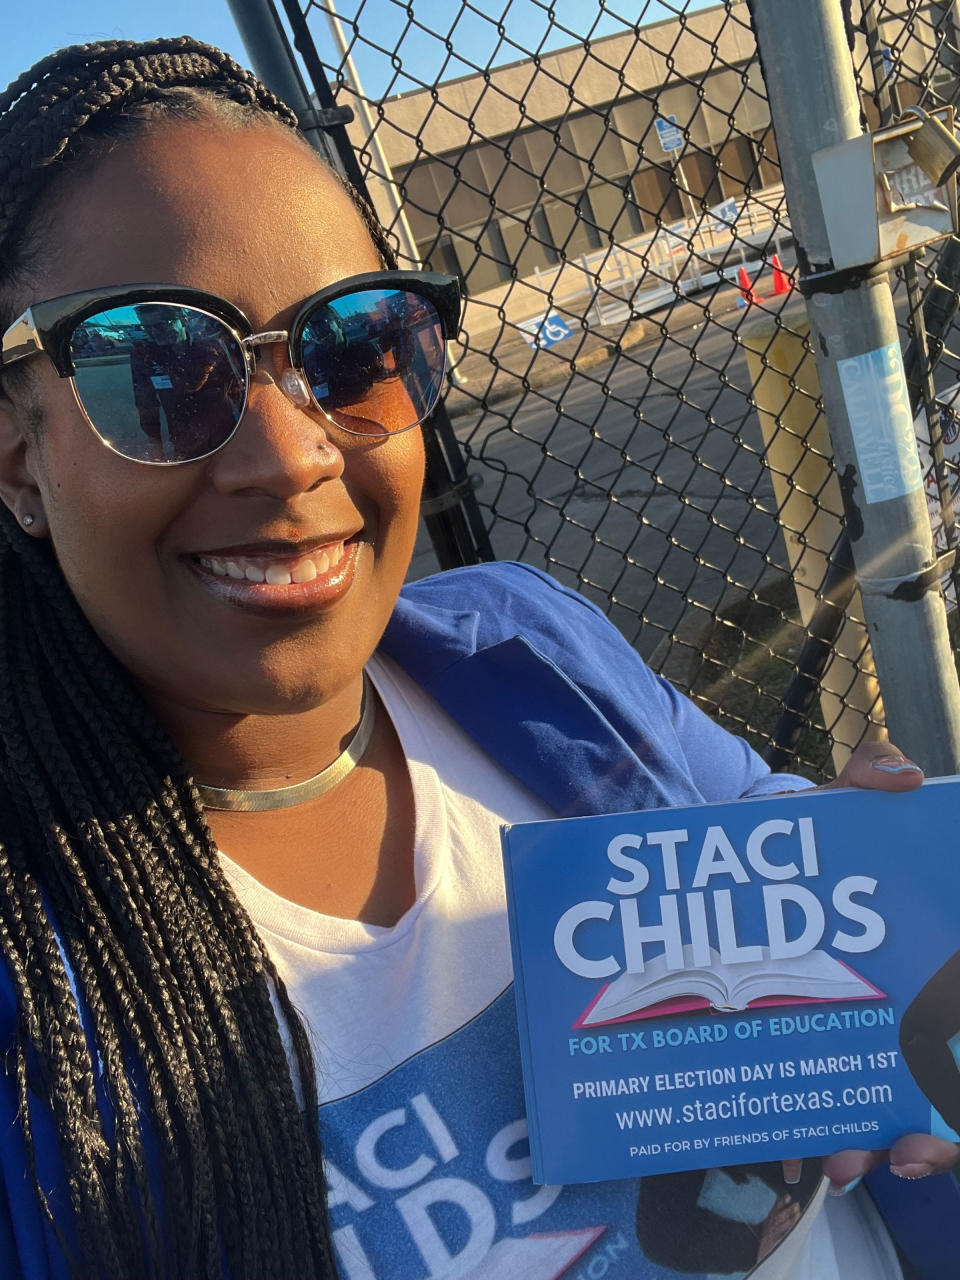 Staci Childs decided to run for the Texas State Board of Education after growing frustrated by the rhetoric over critical race theory in the state.<span class="copyright">Courtesy Staci Childs</span>